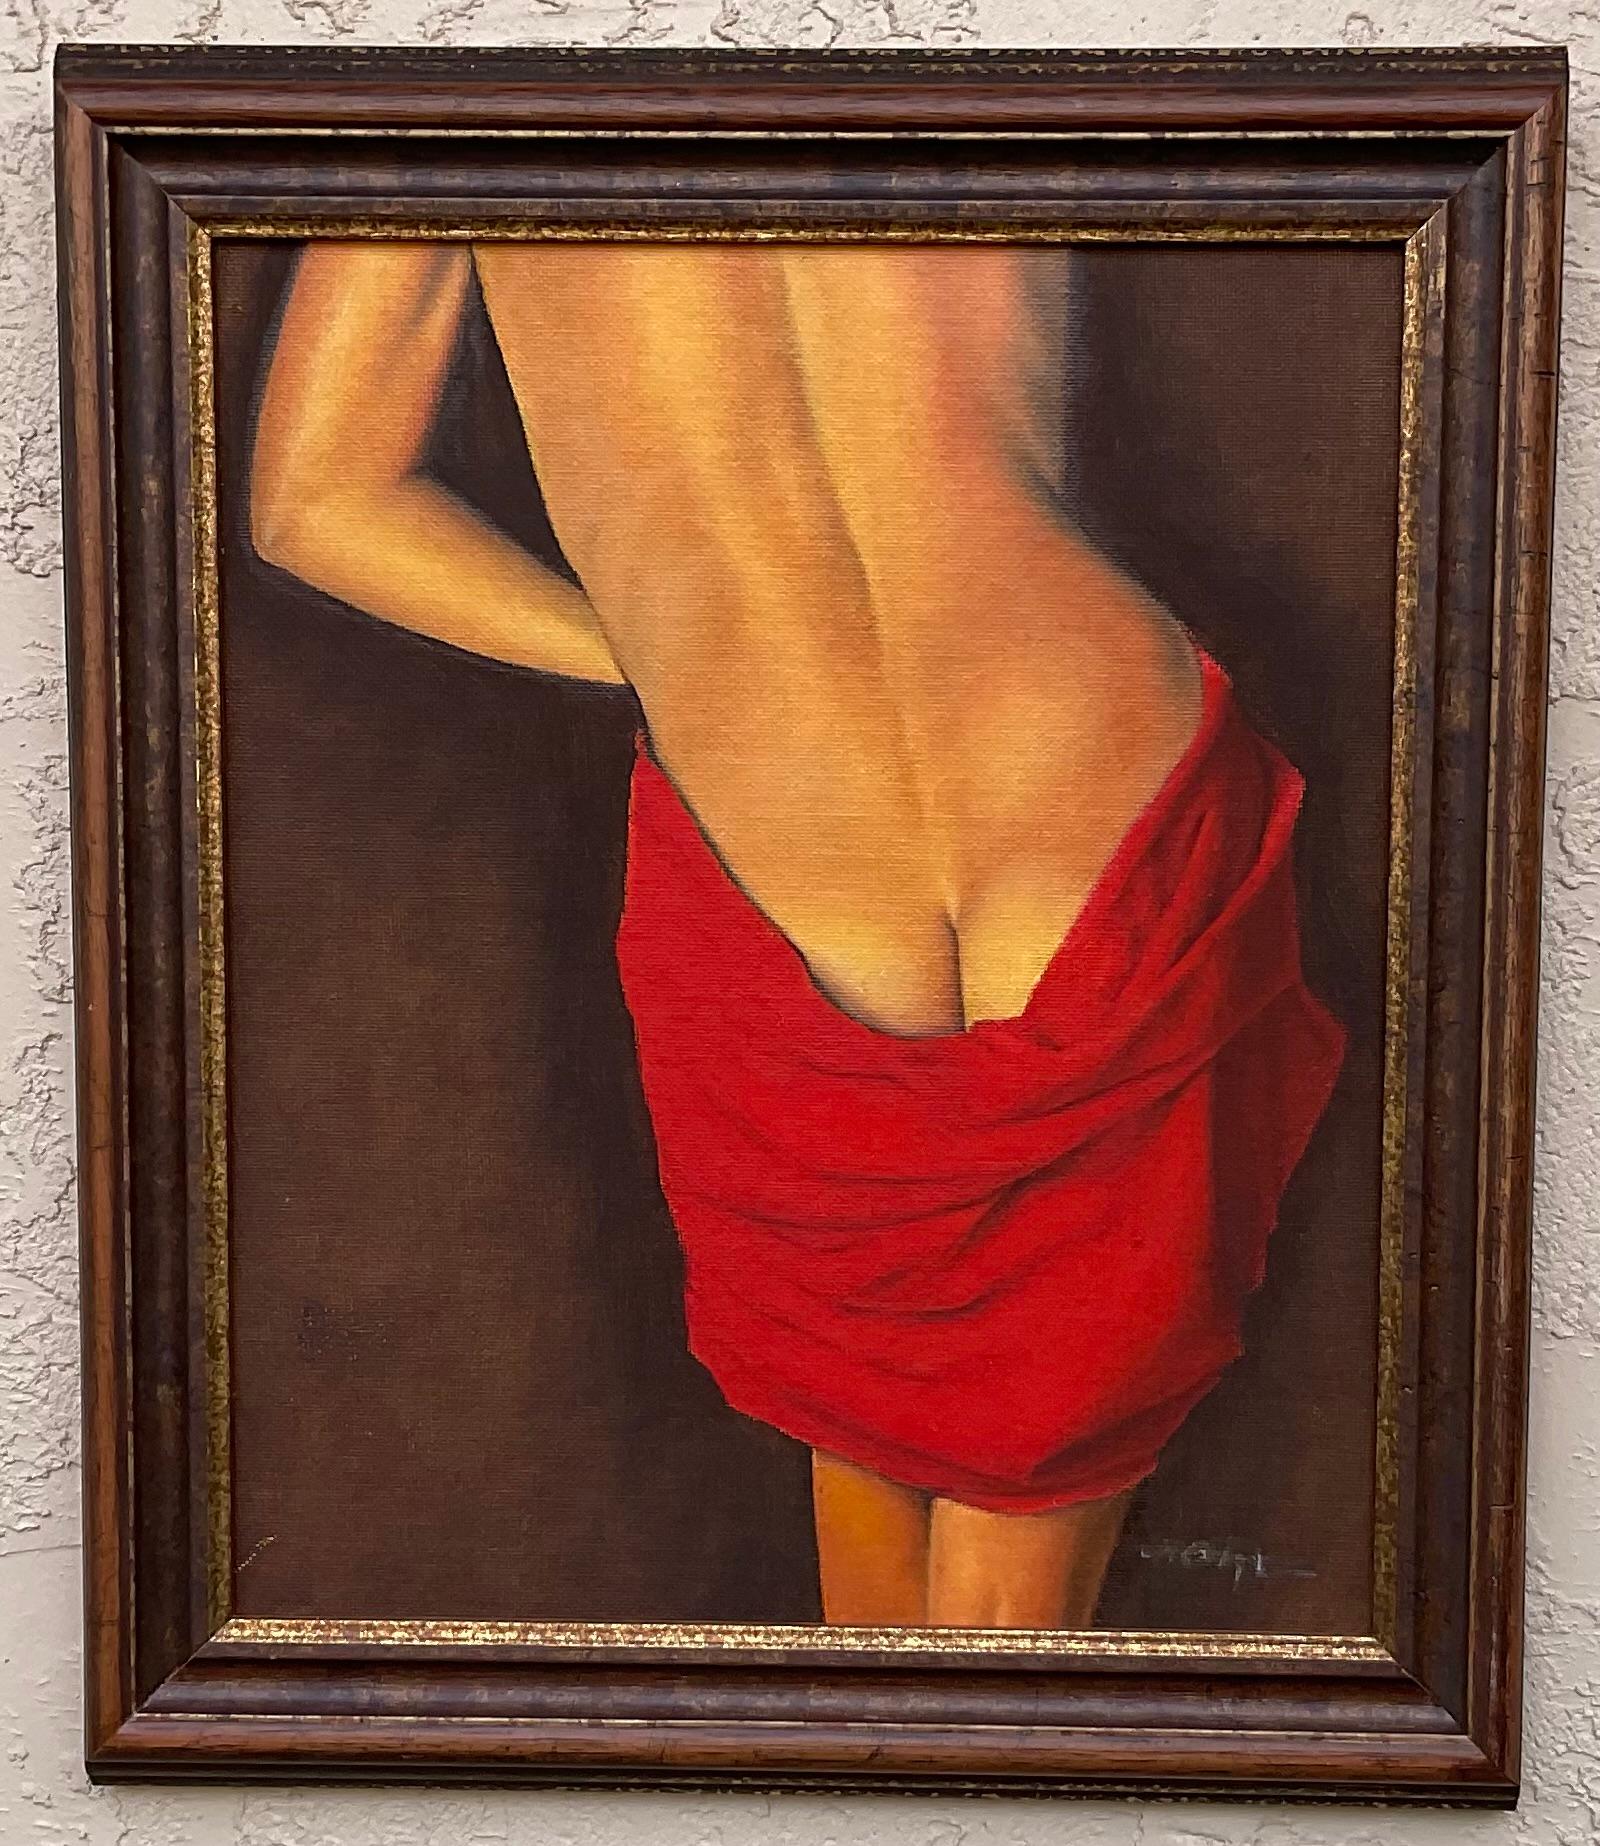 Elegant oil painting of nude woman from the back , beautiful vibrant red dress exposing nicely painted woman back.
Sign on the bottom right.